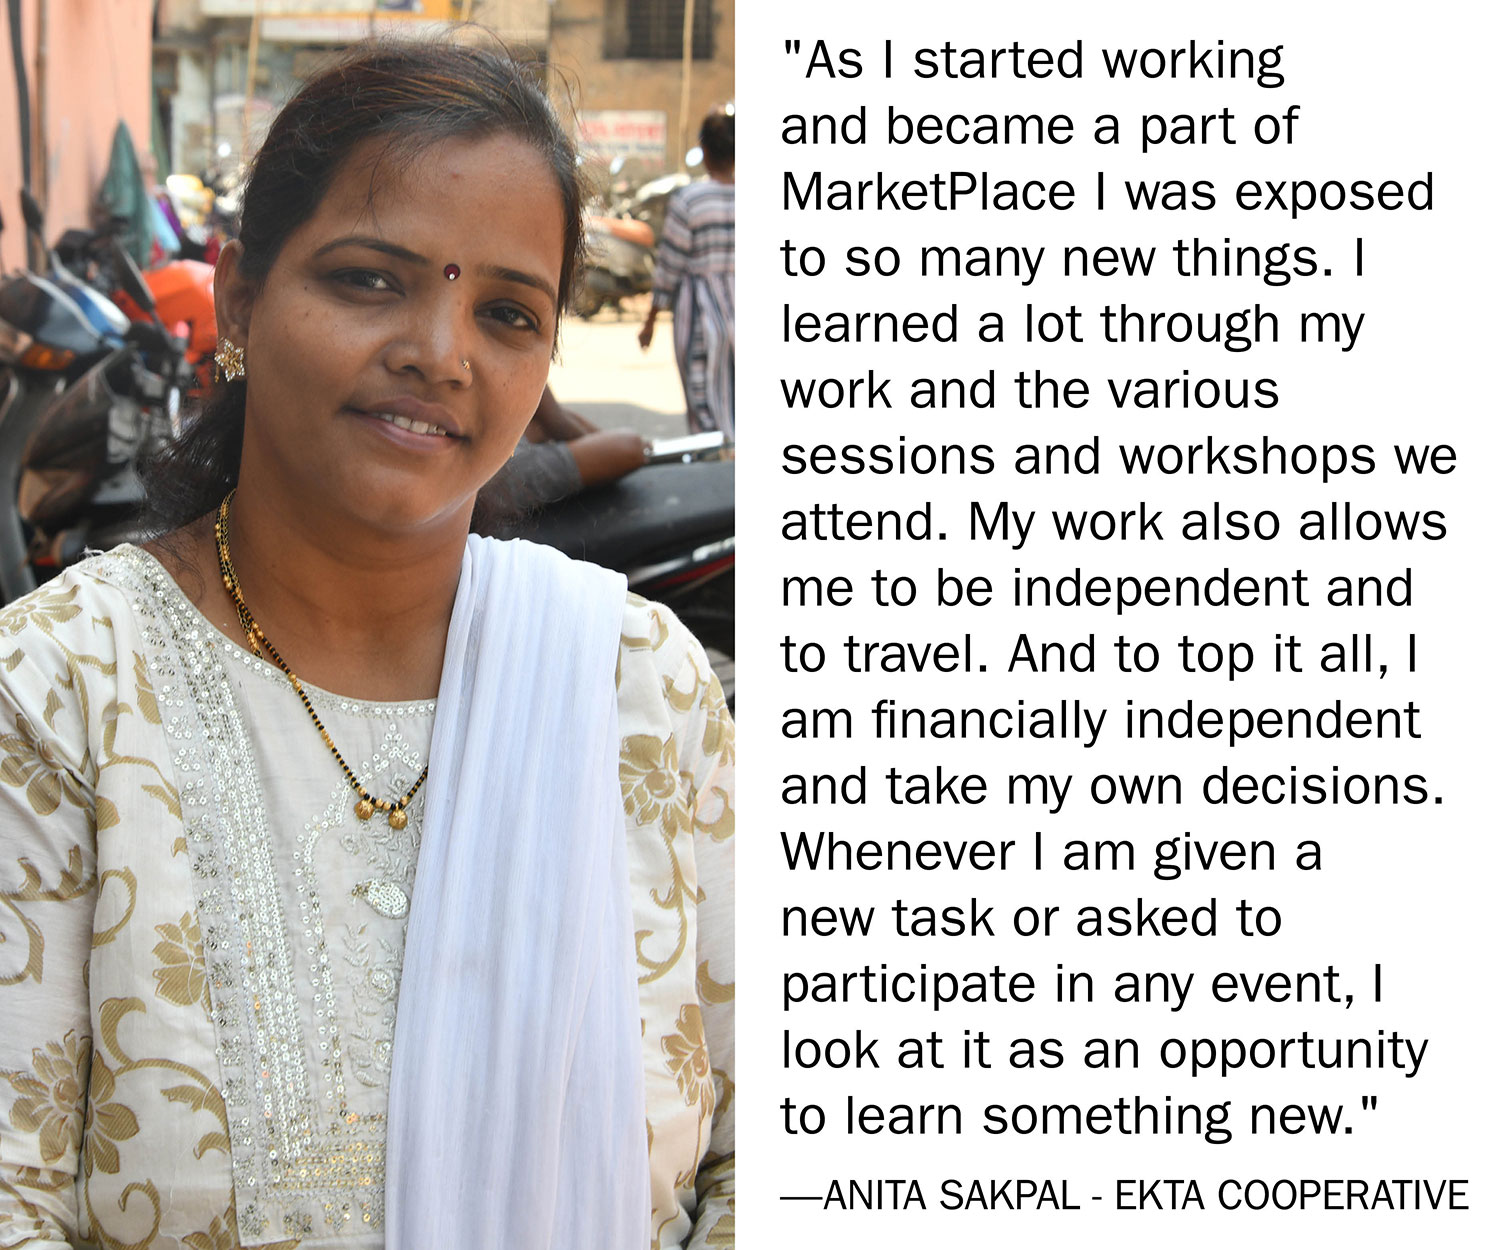 "As I started working and became a part of MarketPlace I was exposed to so many new things. I learned a lot through my work and the various sessions and workshops we attend. My work also allows me to be independent and to travel. And to top it all,
I am financially independent and take my own decisions. Whenever I am given a new task or asked to participate in any event, I look at it as an opportunity to learn something new." Anita Sakpal - Ekta Cooperative